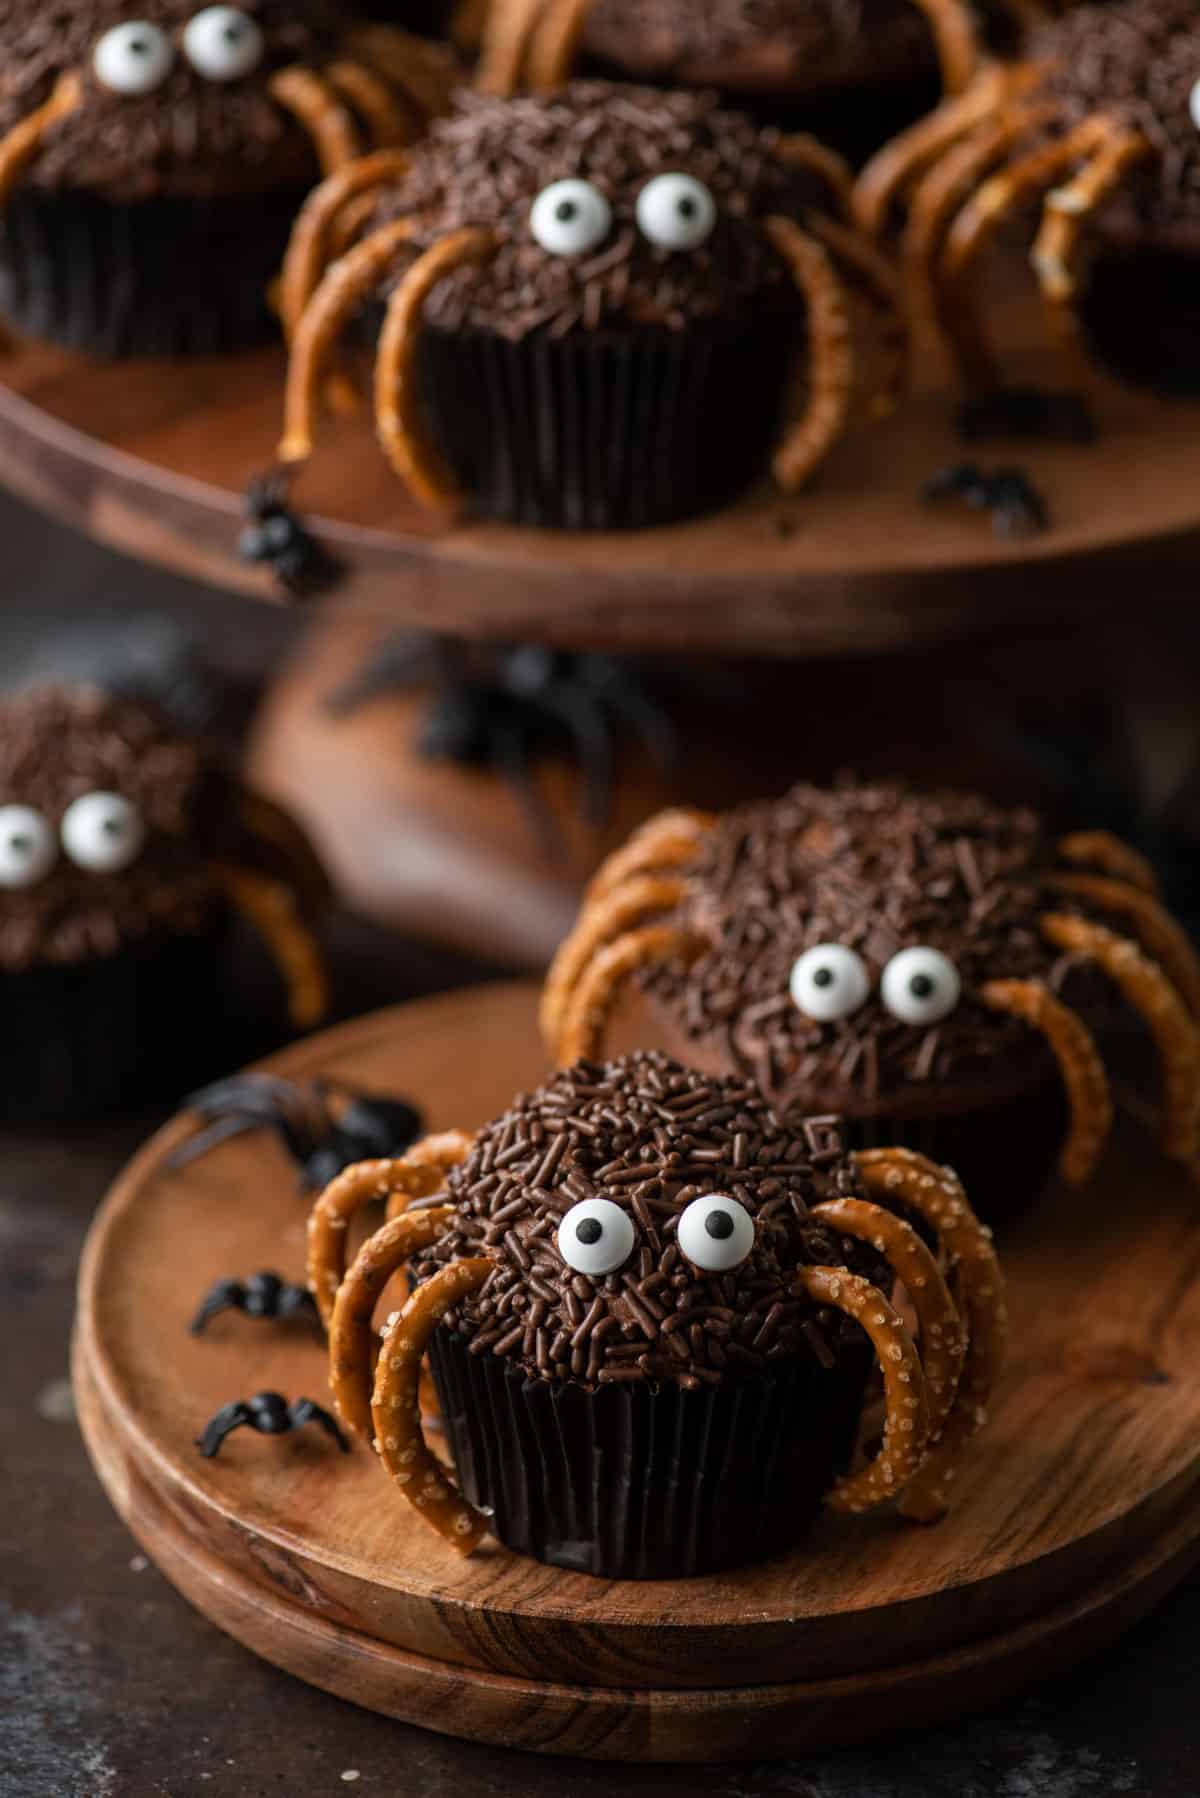 Spider cupcakes on a plate